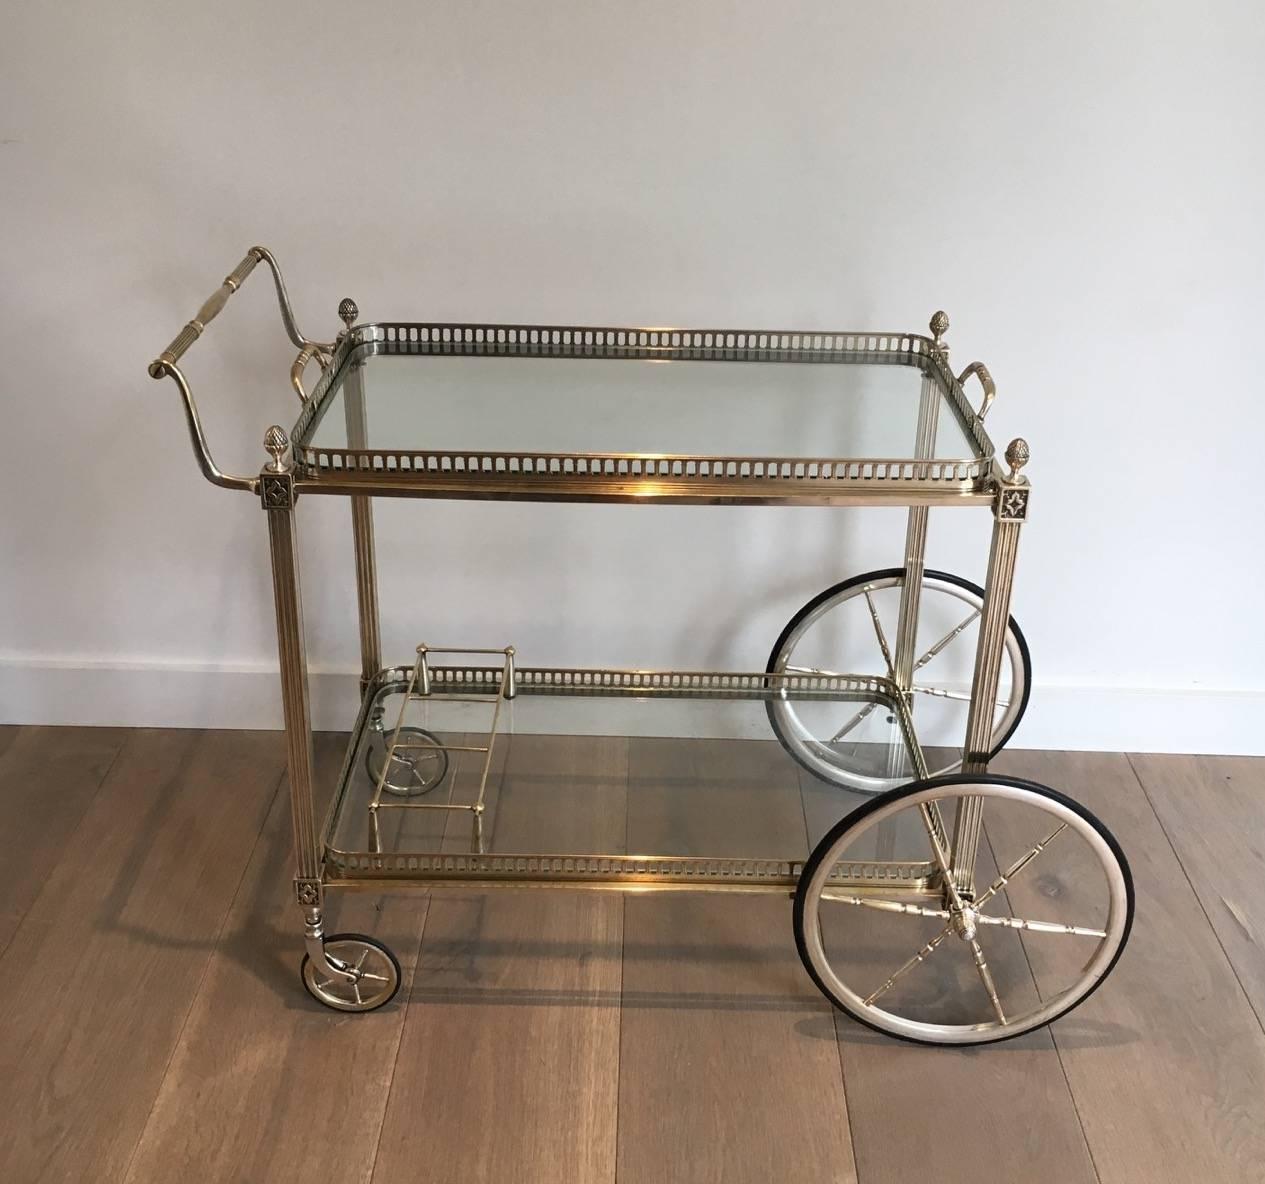 A French bar cart in silvered brass. The top shelf is removable and the bottom shelf has a bottle rack, circa 1940s

This bar cart is currently in France, please allow 2 to 4 weeks delivery to New York. Shipping costs from France to our warehouse